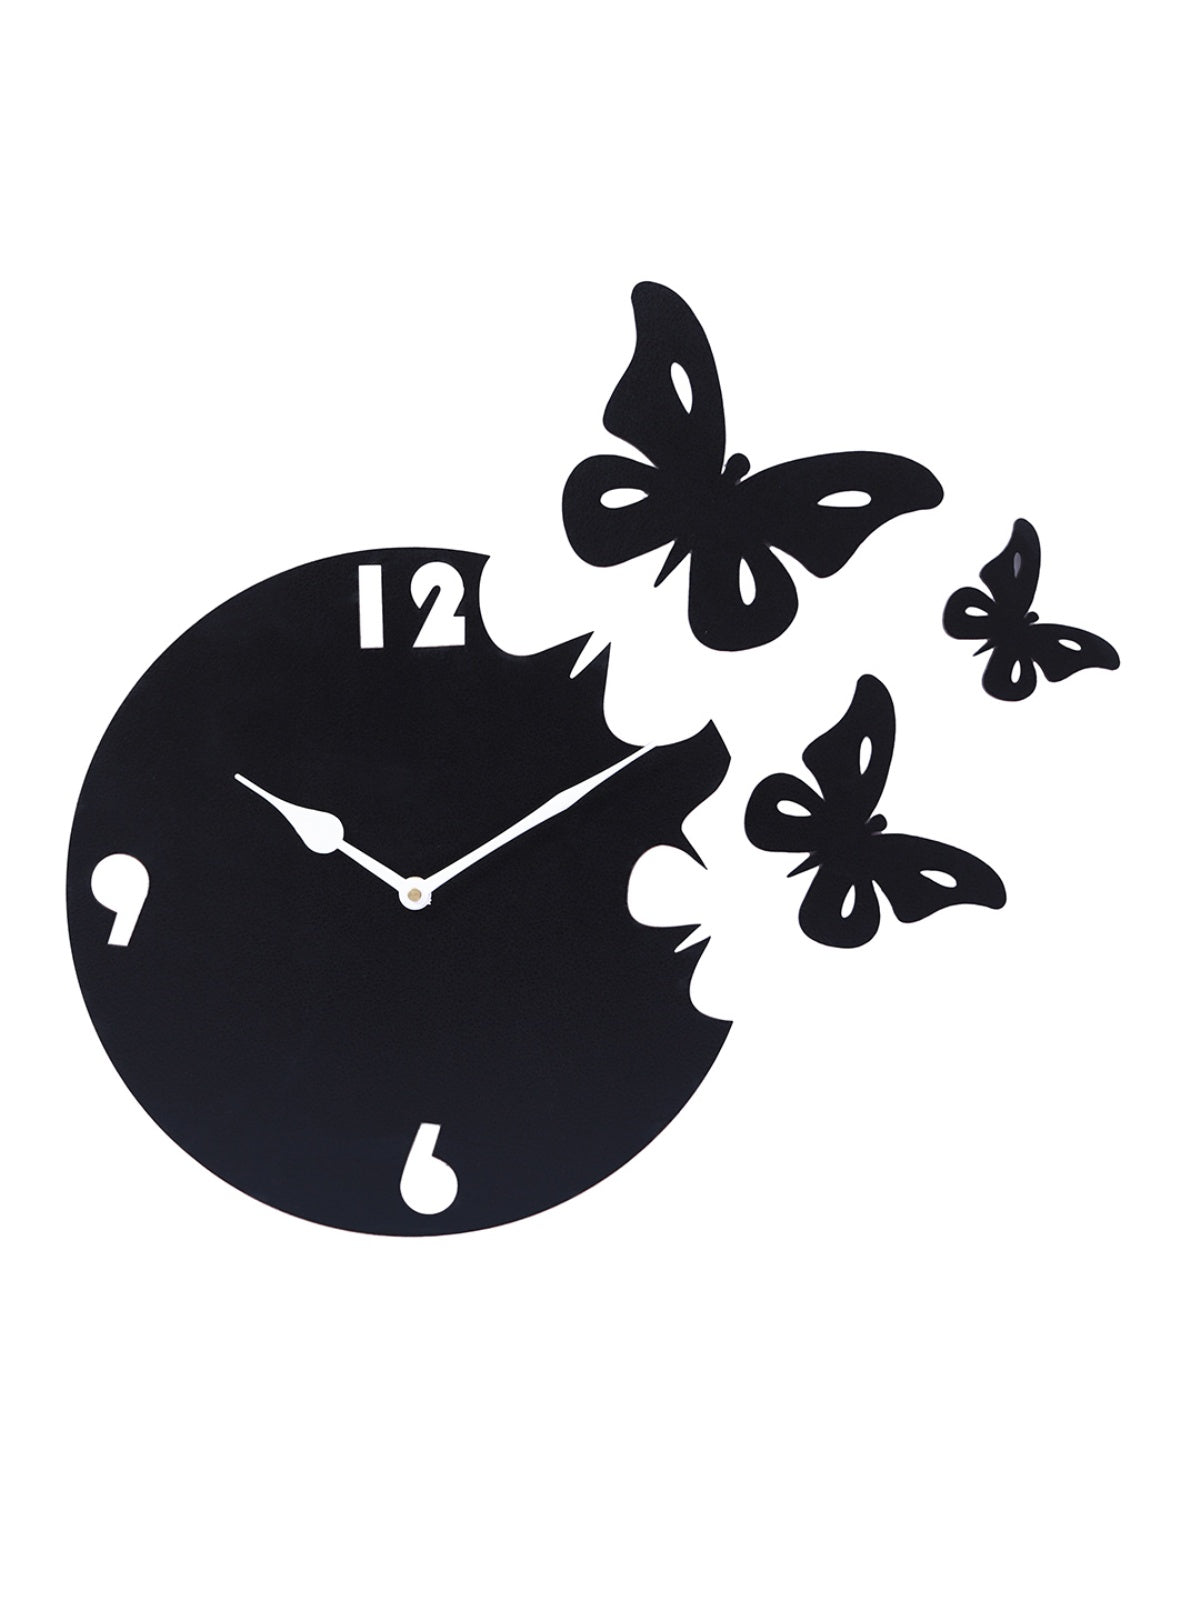 Butterfly Designer Wooden Wall Clock for Home, Black